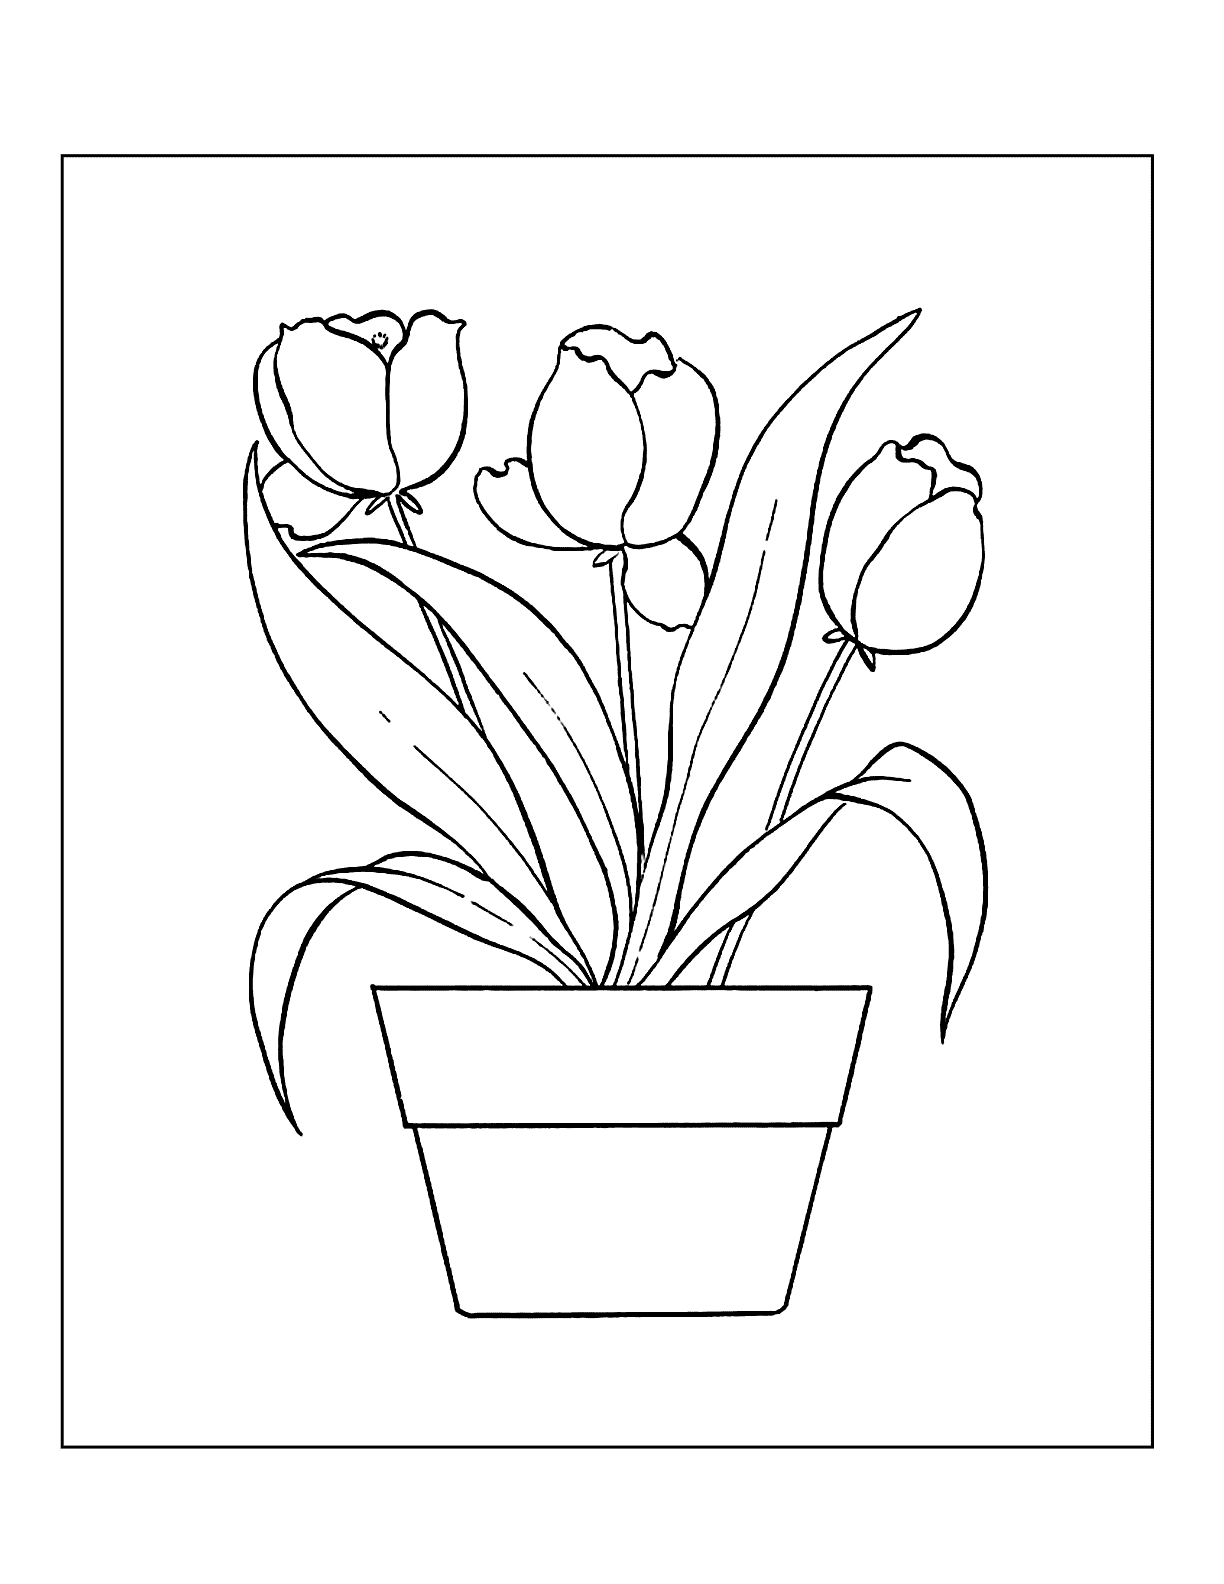 Tulips In A Flower Pot Coloring Page